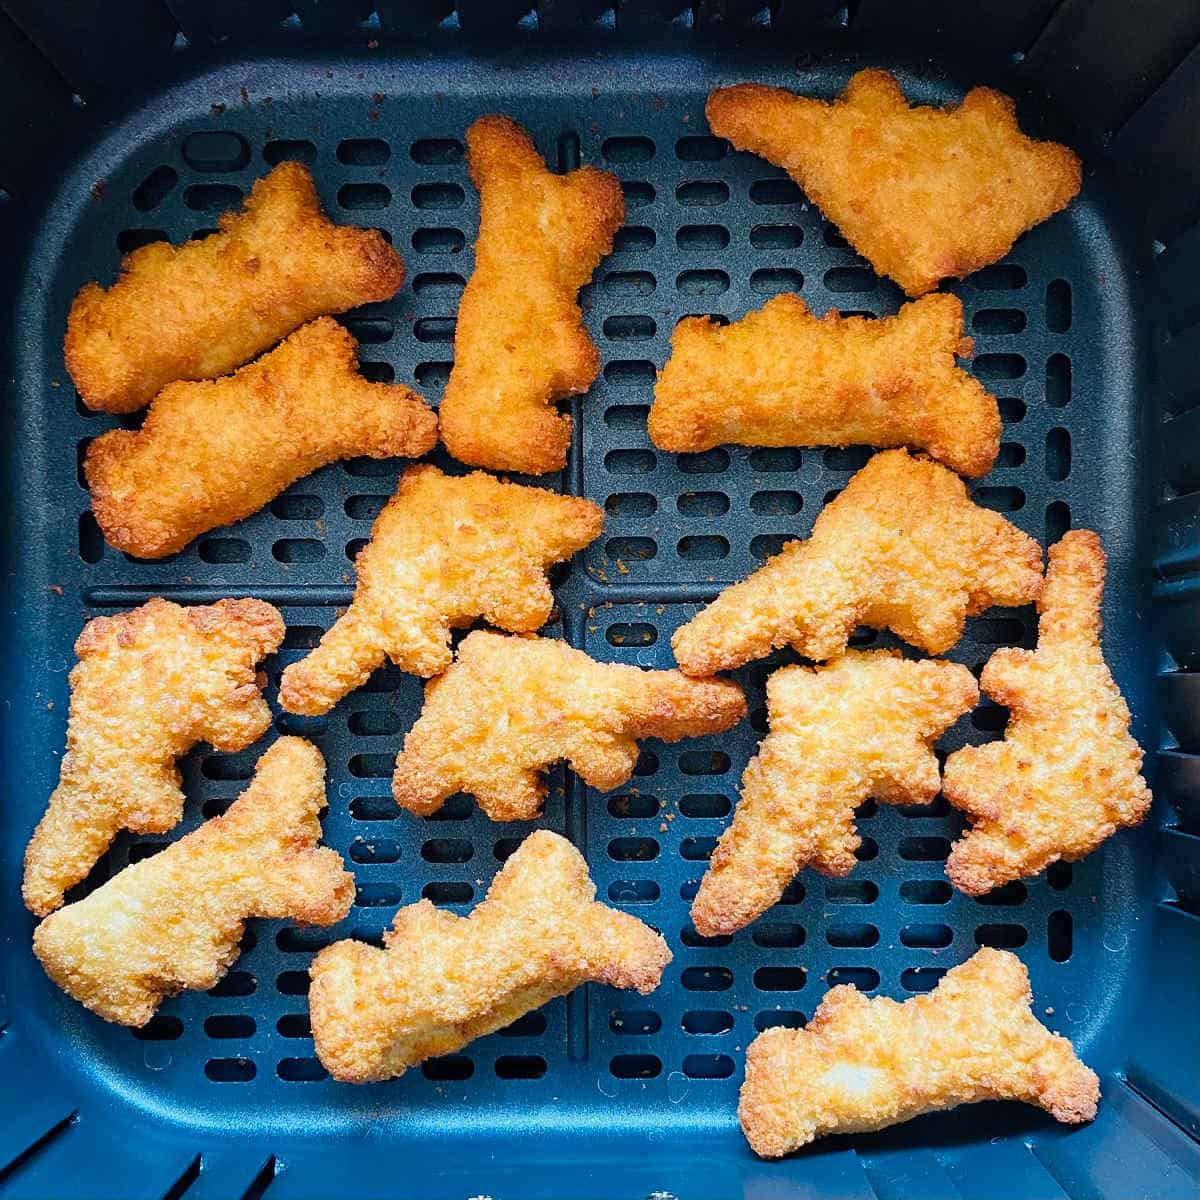 Dino nuggets in air fryer